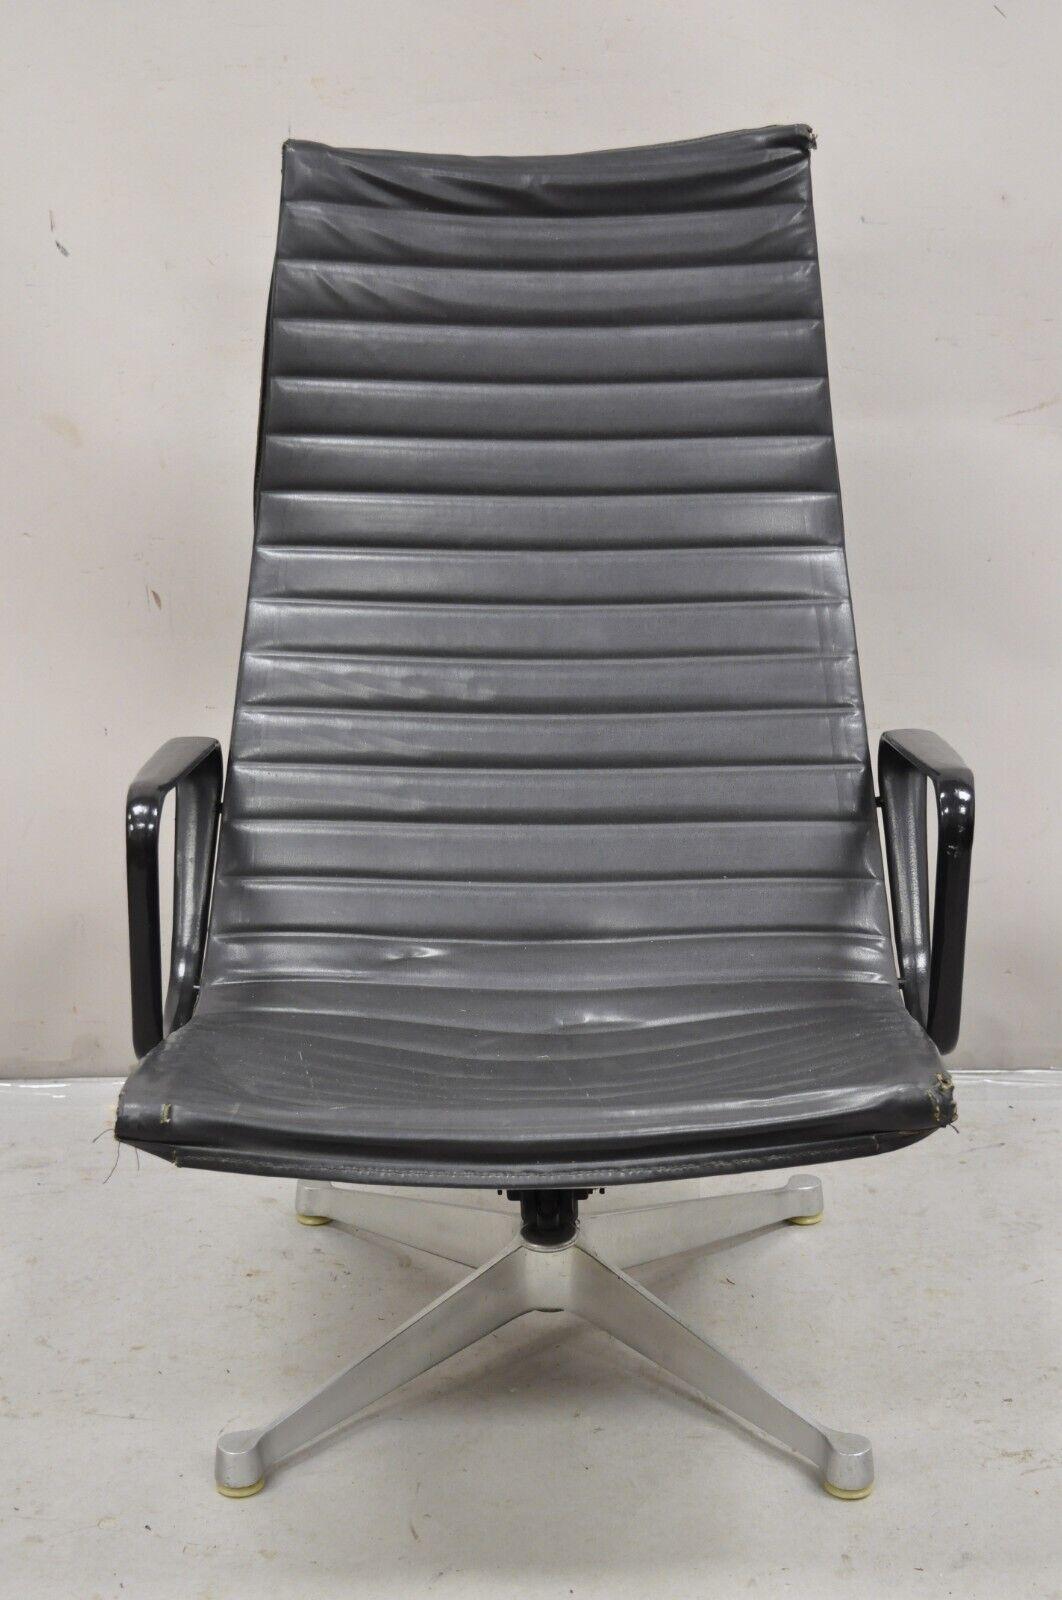 Chaise de groupe vintage Herman Miller Charles and Ray Eames Design pivotante en aluminium Circa Late 20th Century. Dimensions : 40